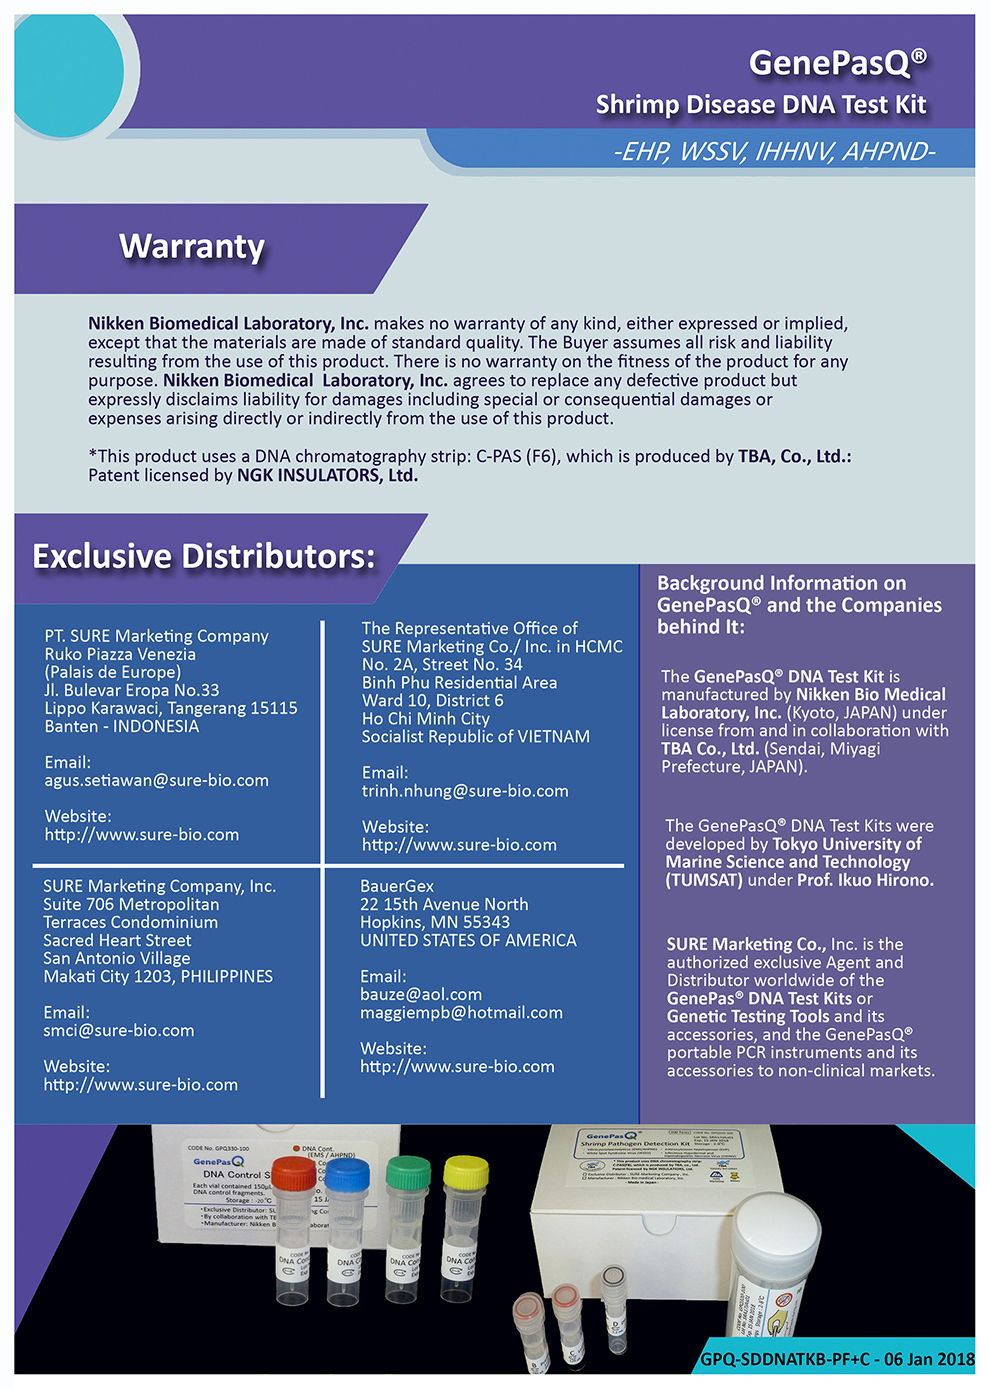 Warranty and Exclusive Distributors of these kits